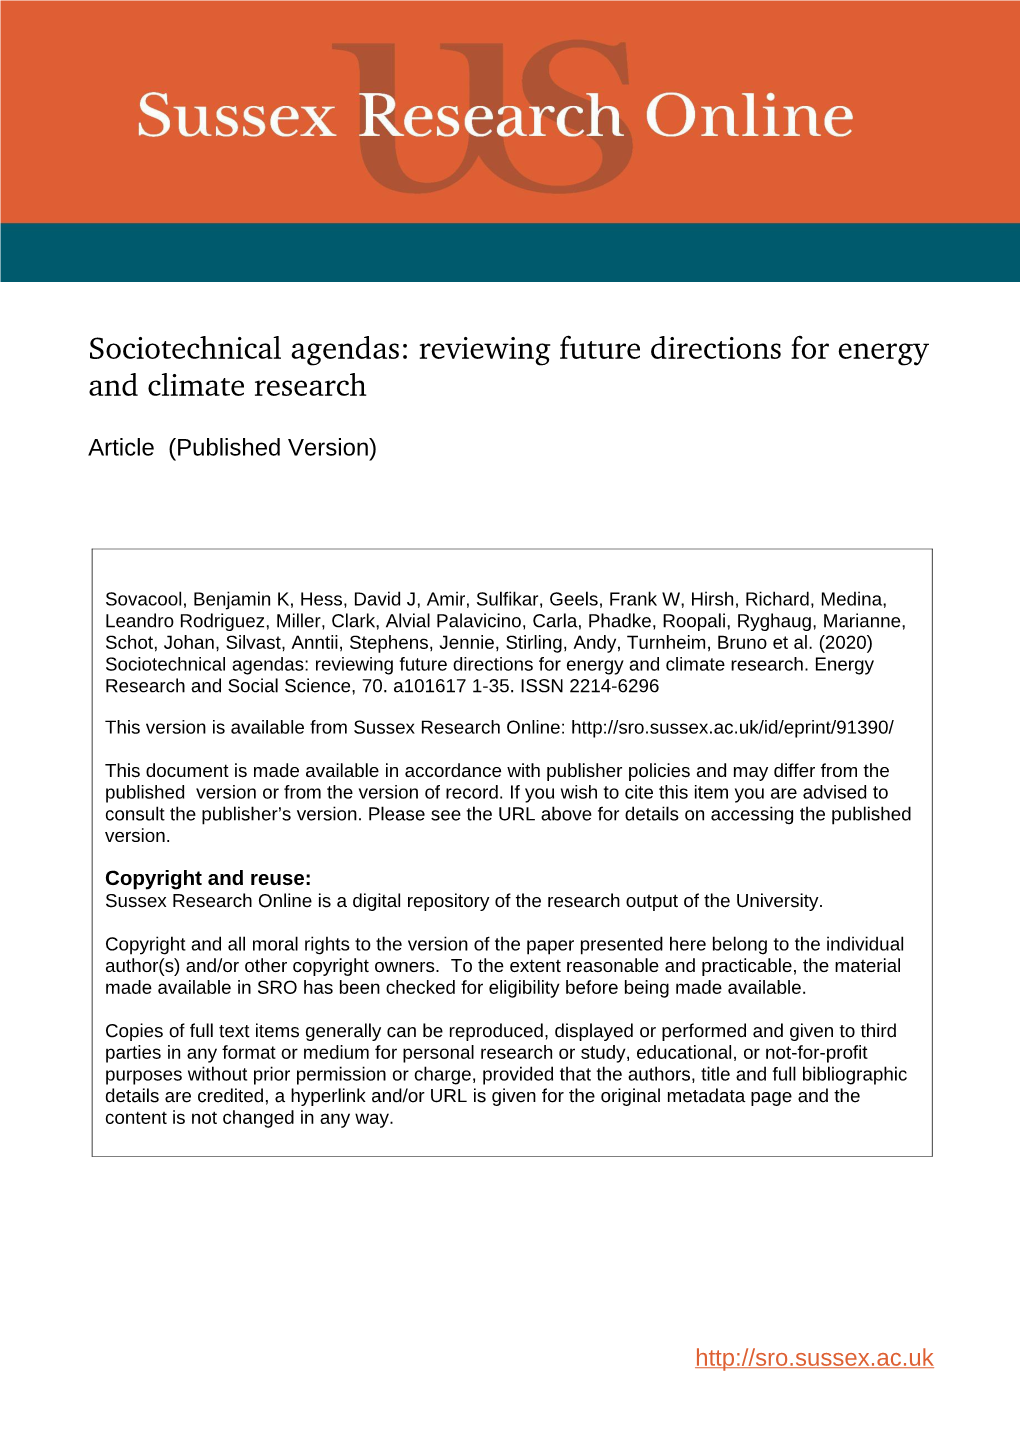 Sociotechnical Agendas Reviewing Future Directions for Energy and Climate Research